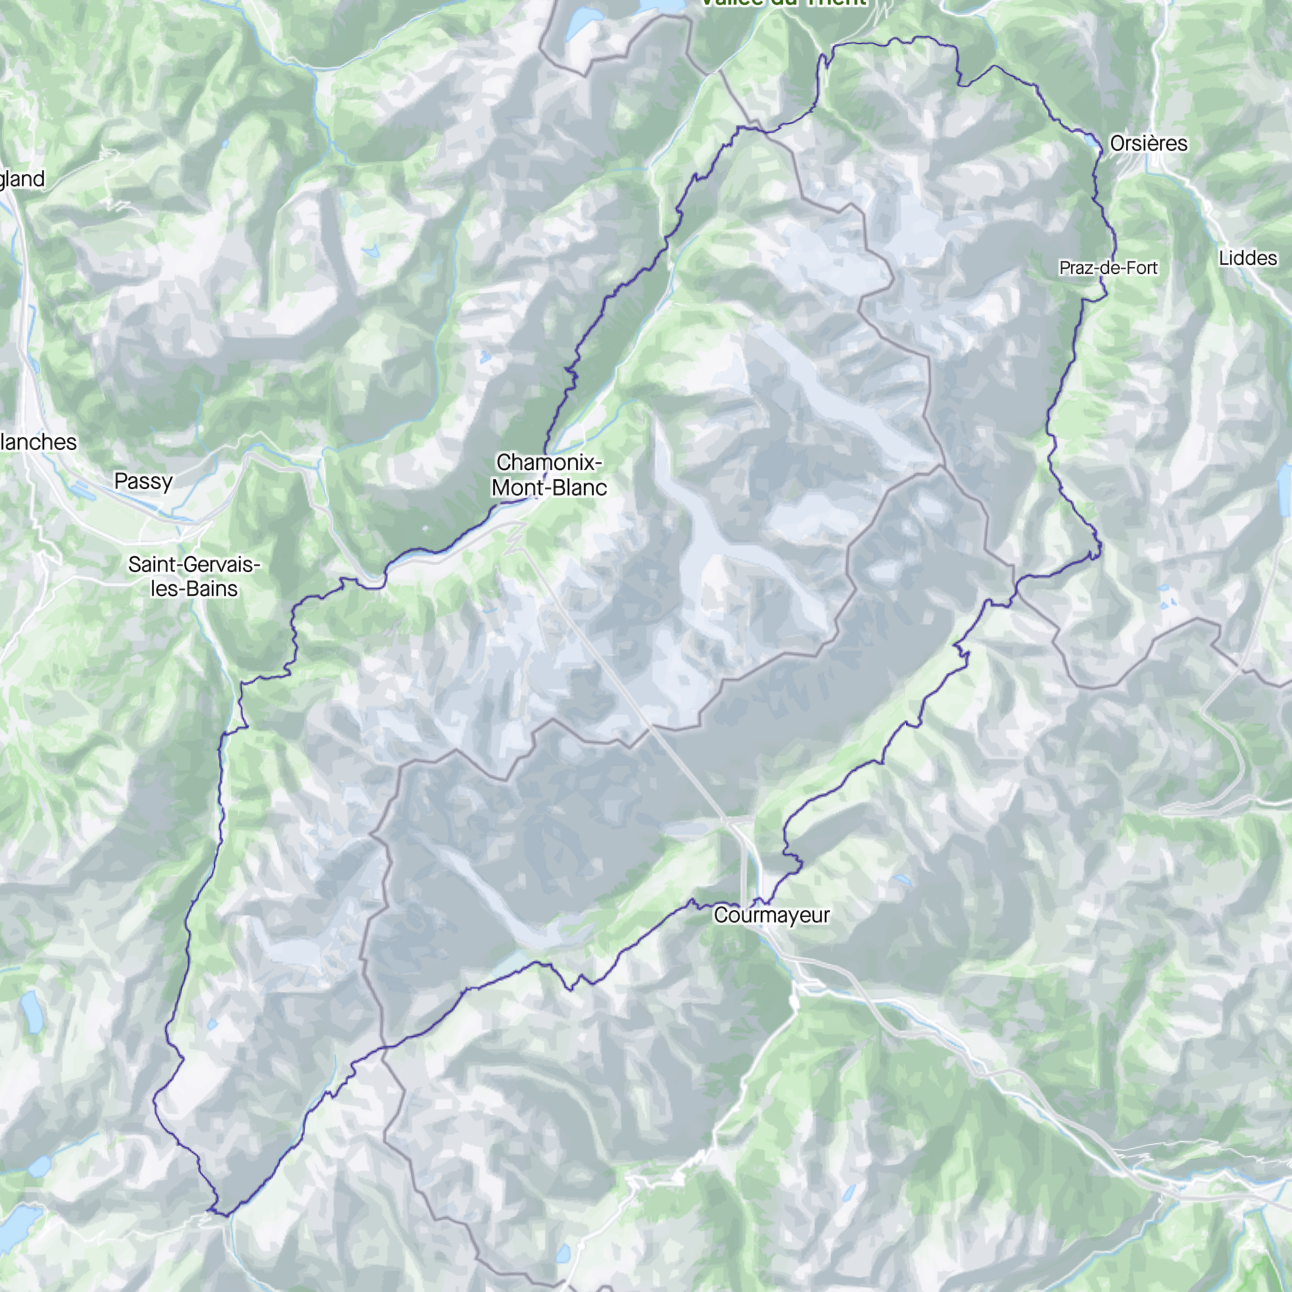 The route overlaid on a terrain map.